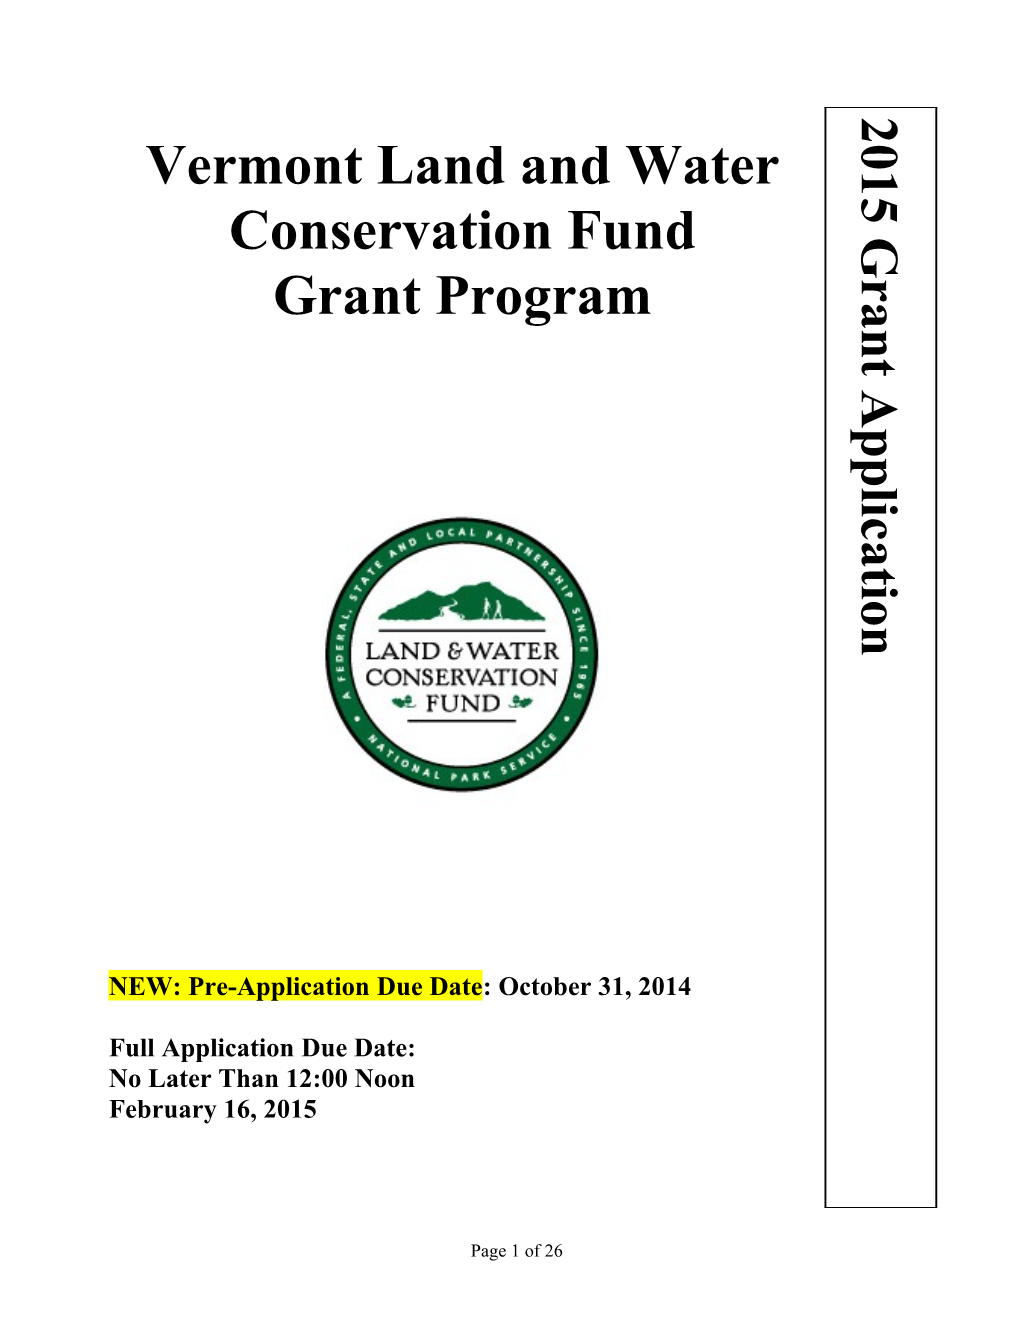 Vermont Land and Water Conservation Fund